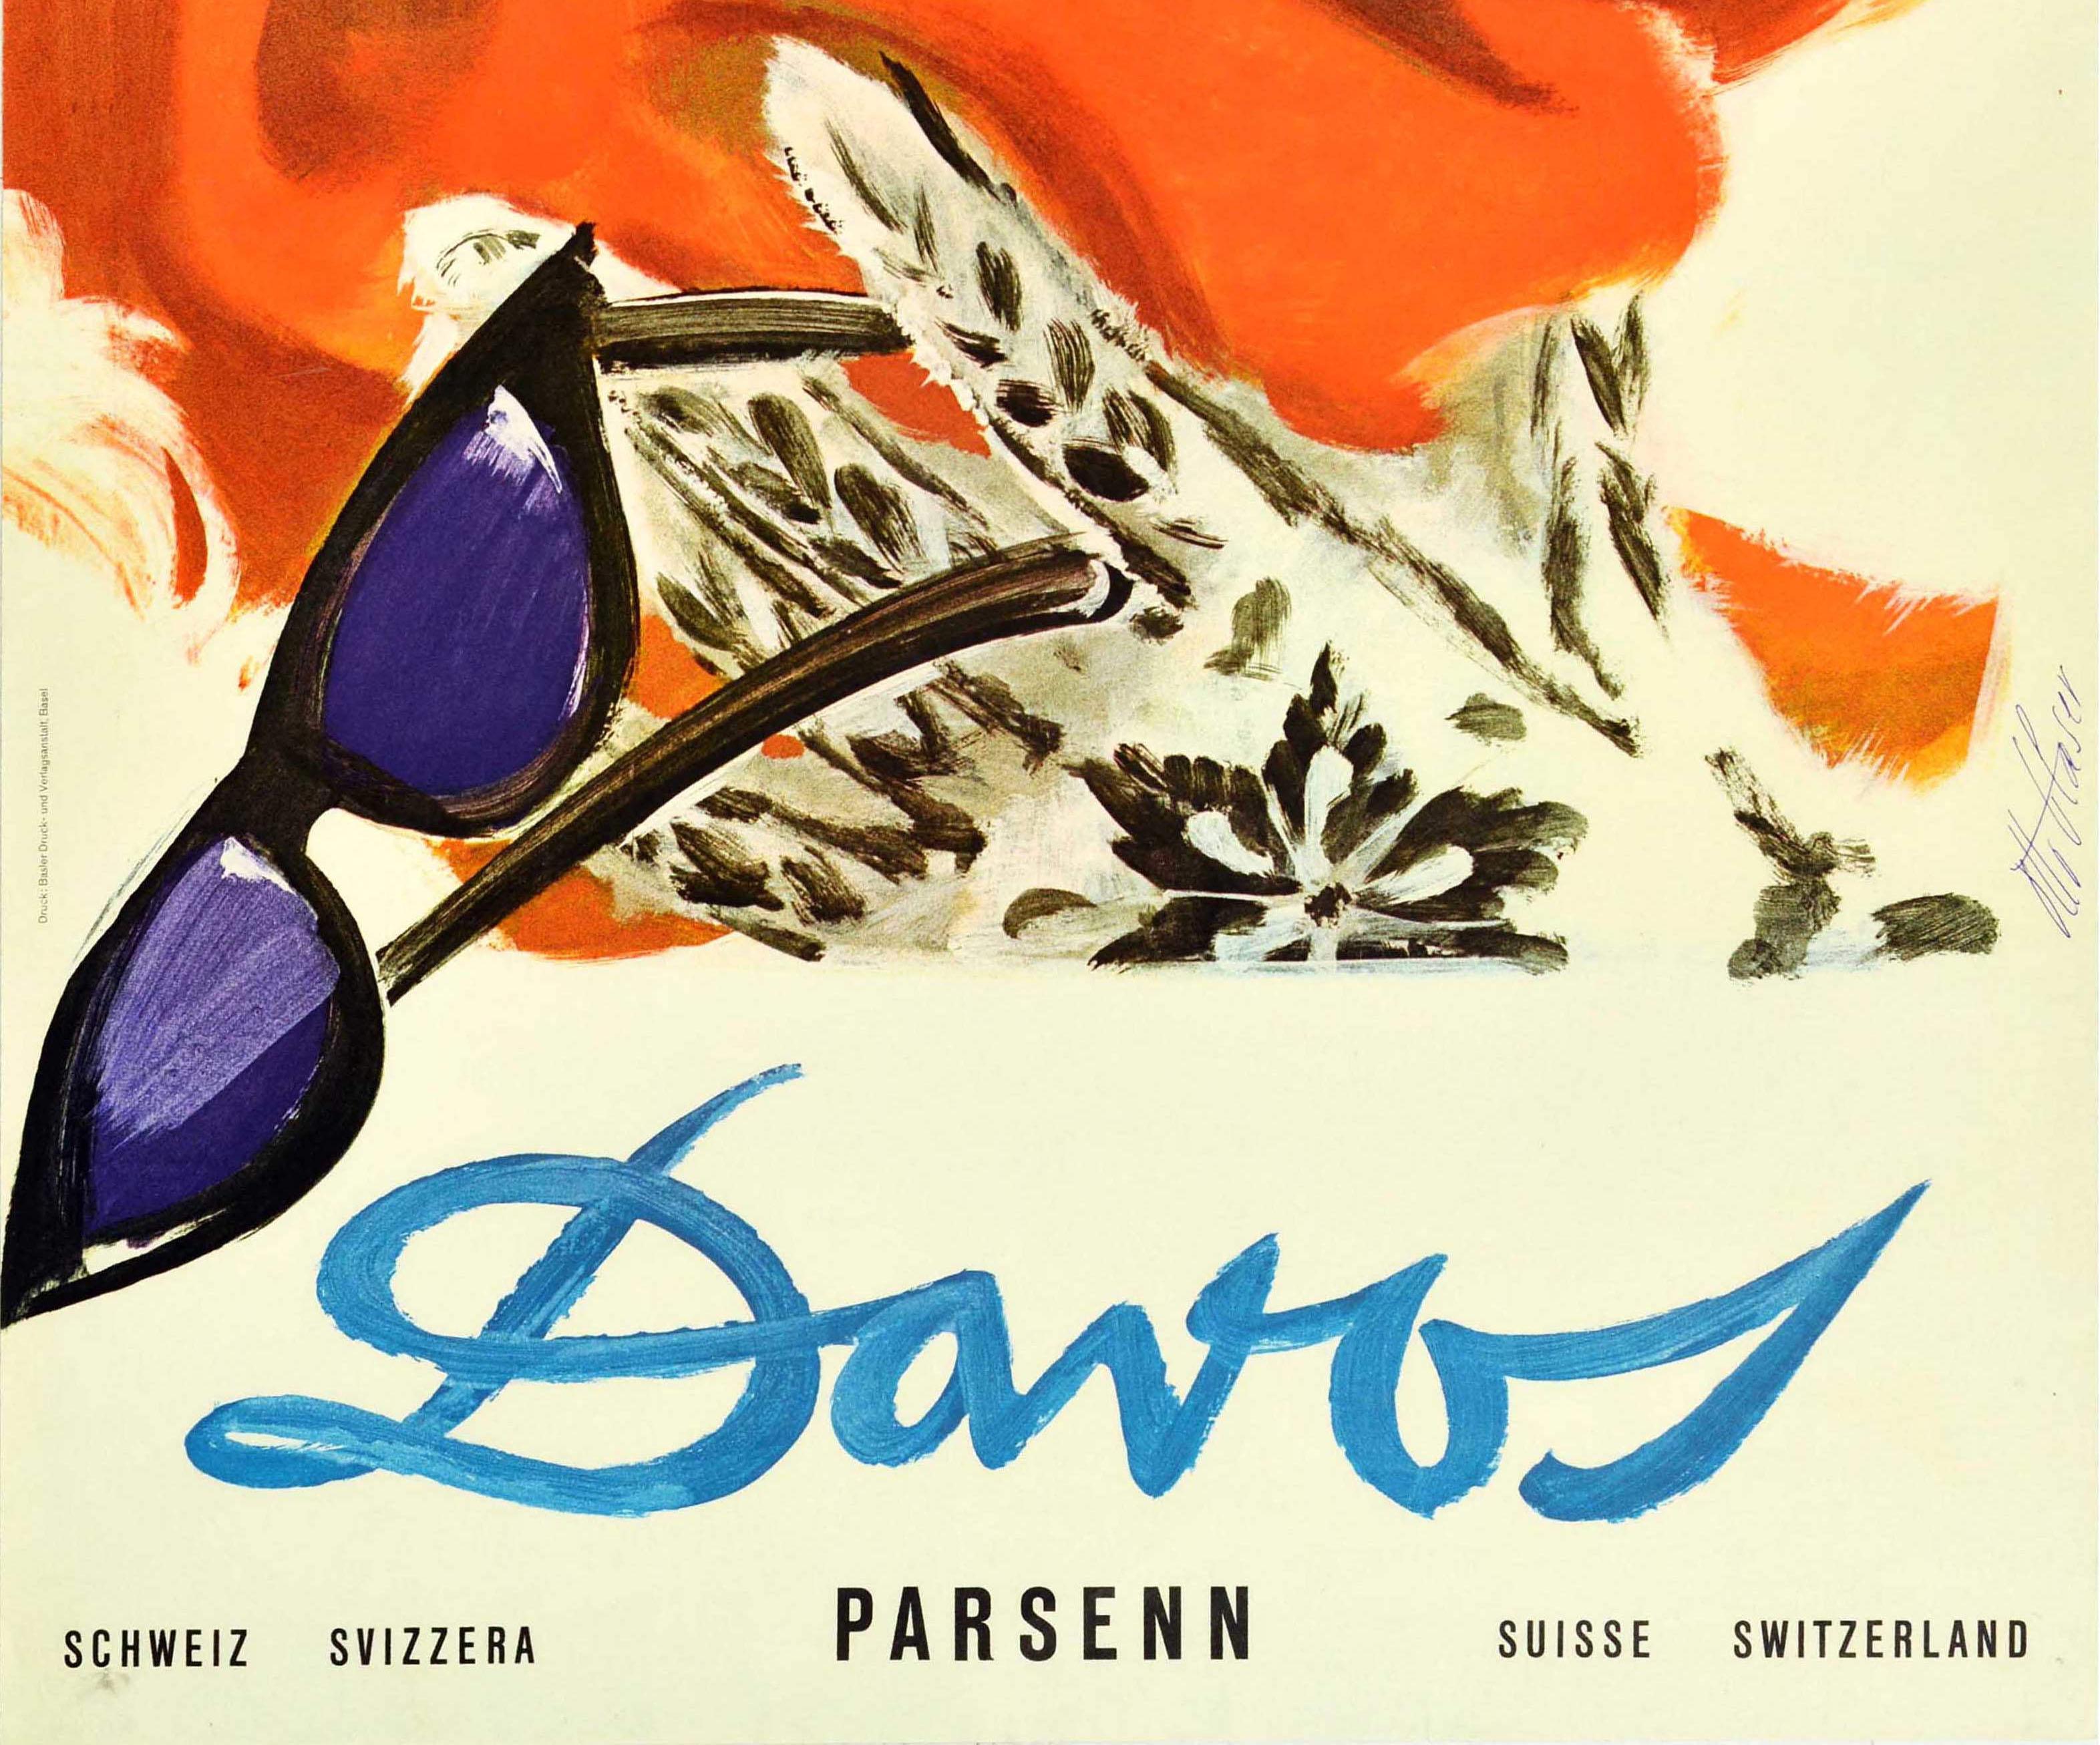 Original vintage travel poster for the popular ski resort of Davos Parsenn in Switzerland Schweiz Svizzera Suisse. Great artwork by the Swiss artist Otto Glaser (1915-1991) depicting a lady wearing a red shawl over her head held with a snowflake